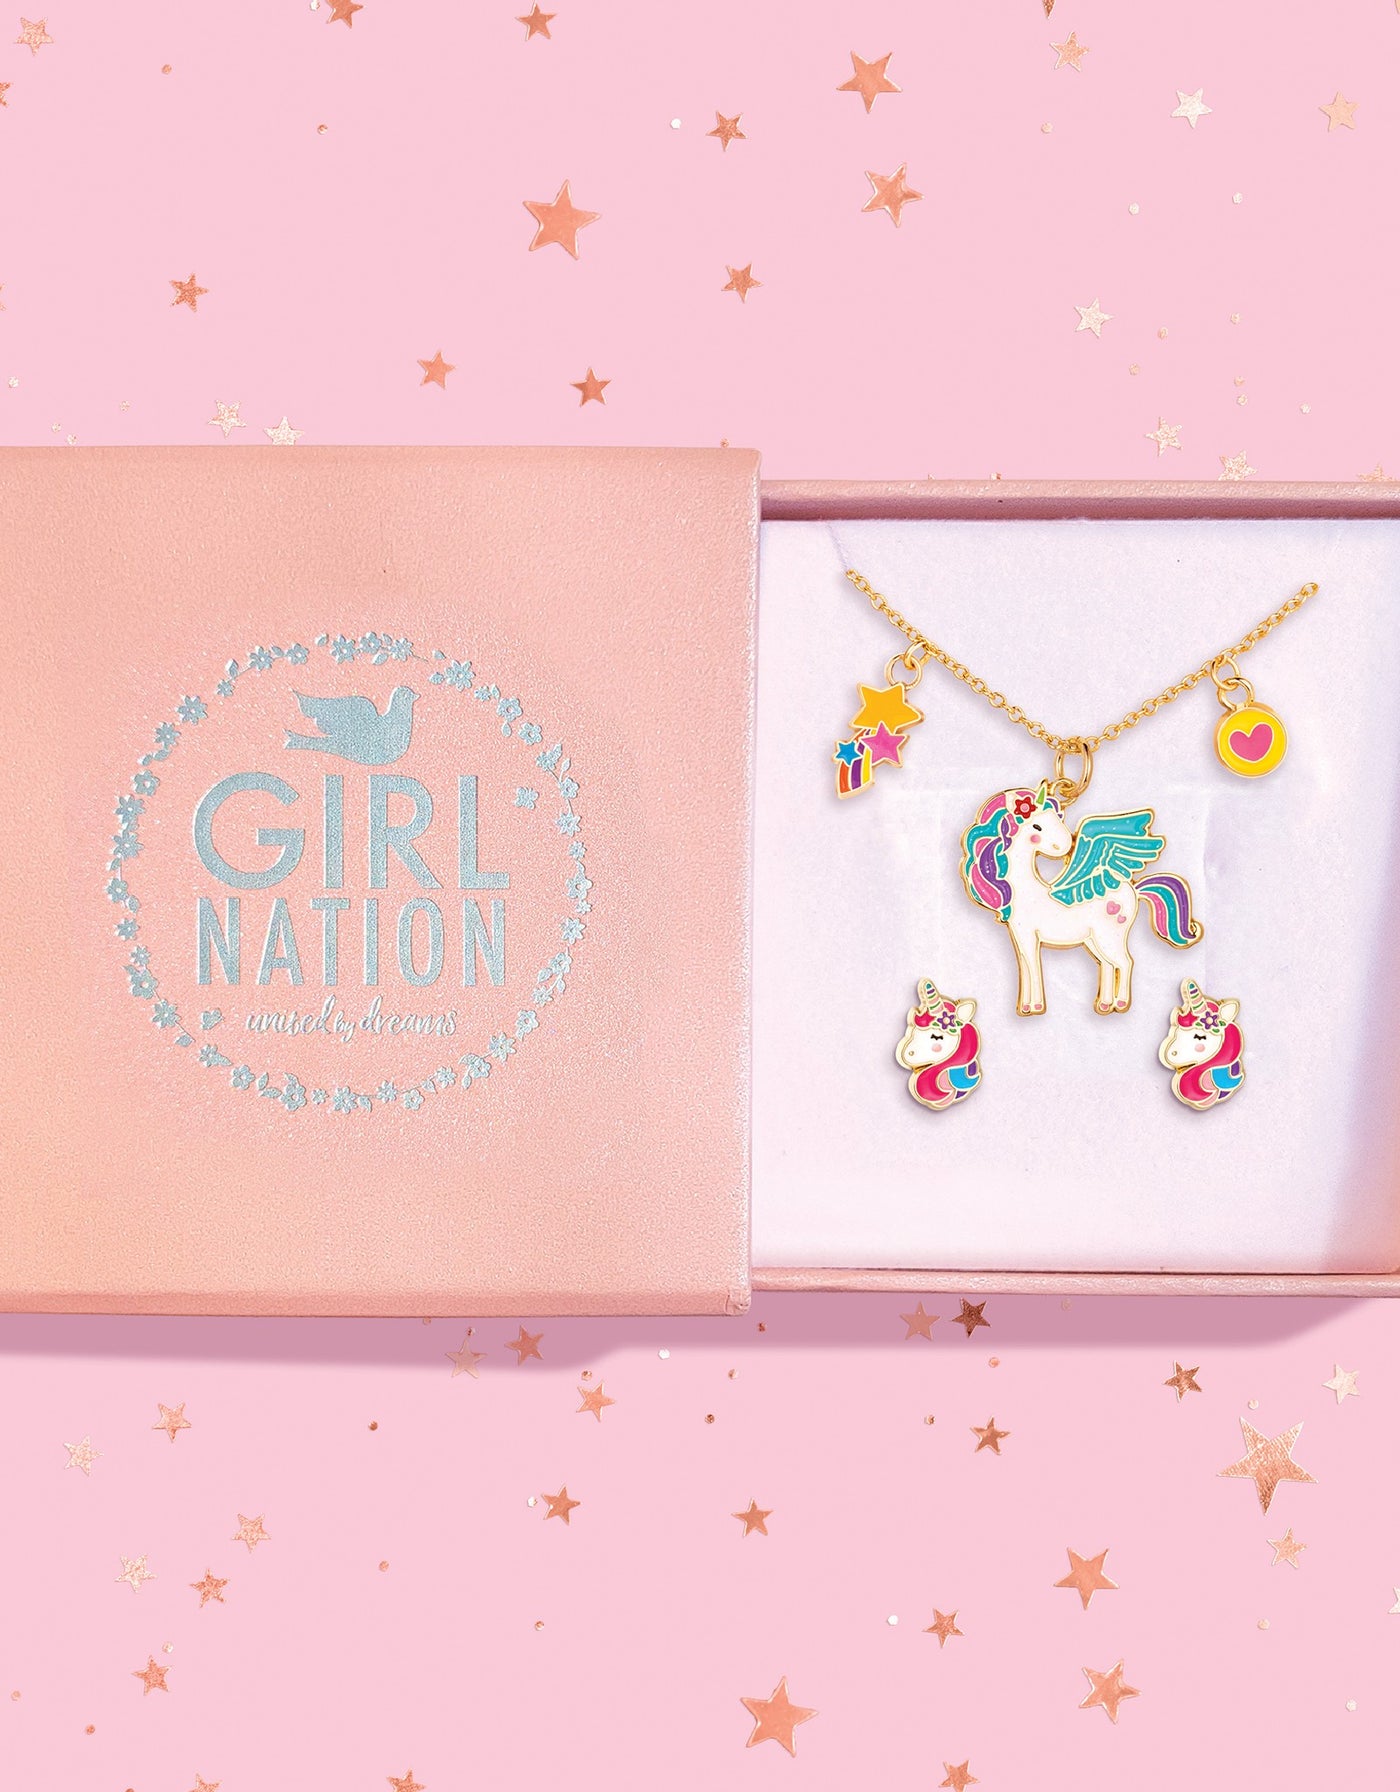 Fantasy necklace and earrings gift set - Unicorn and glitter flower - Girl Nation